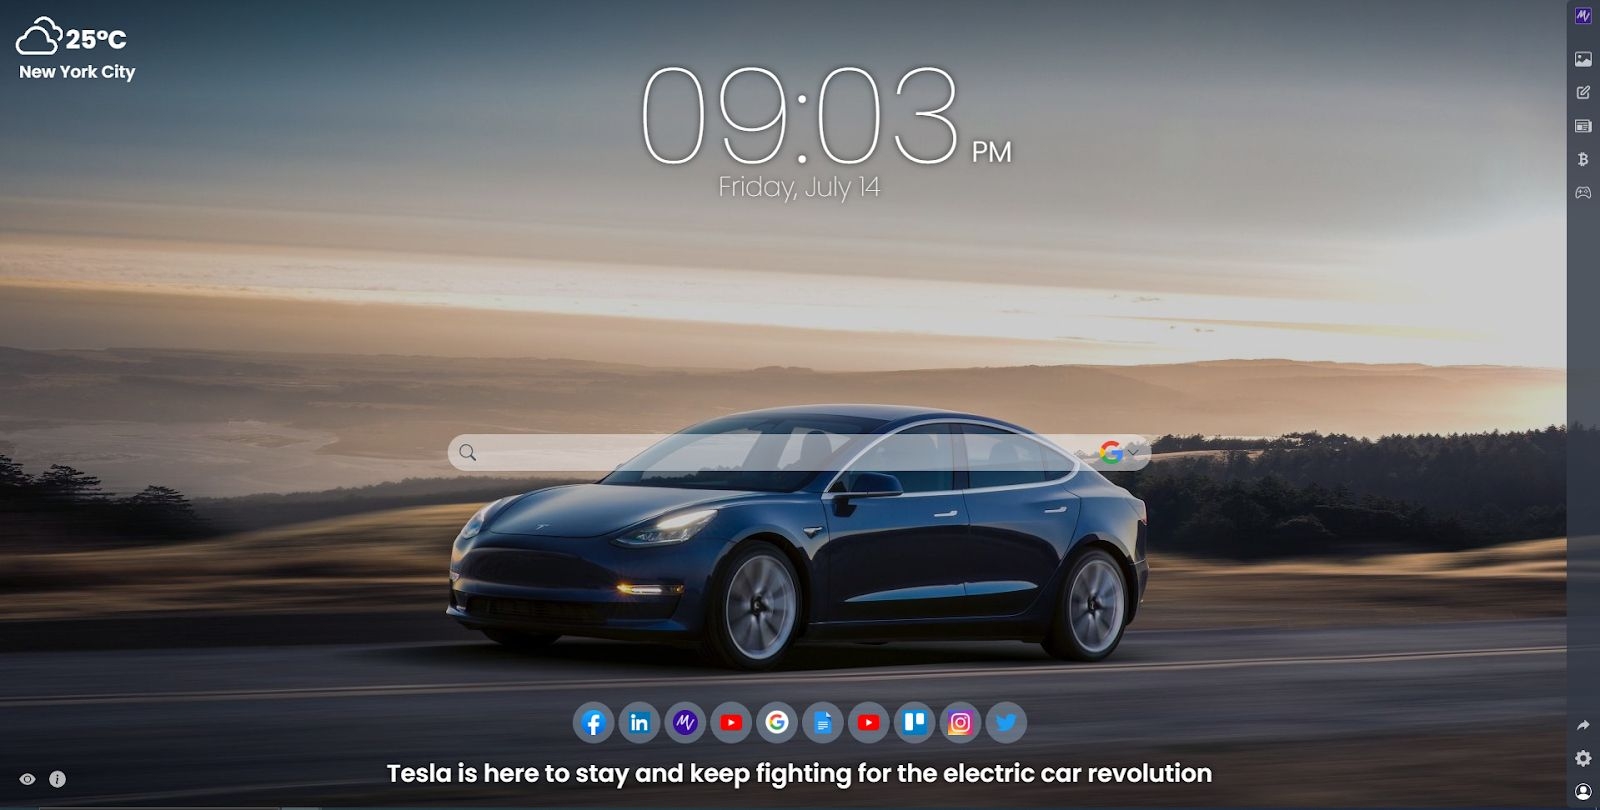 Unveiling the Beauty: Enjoying Stunning Tesla Pictures Daily with the MeaVana Chrome Extension